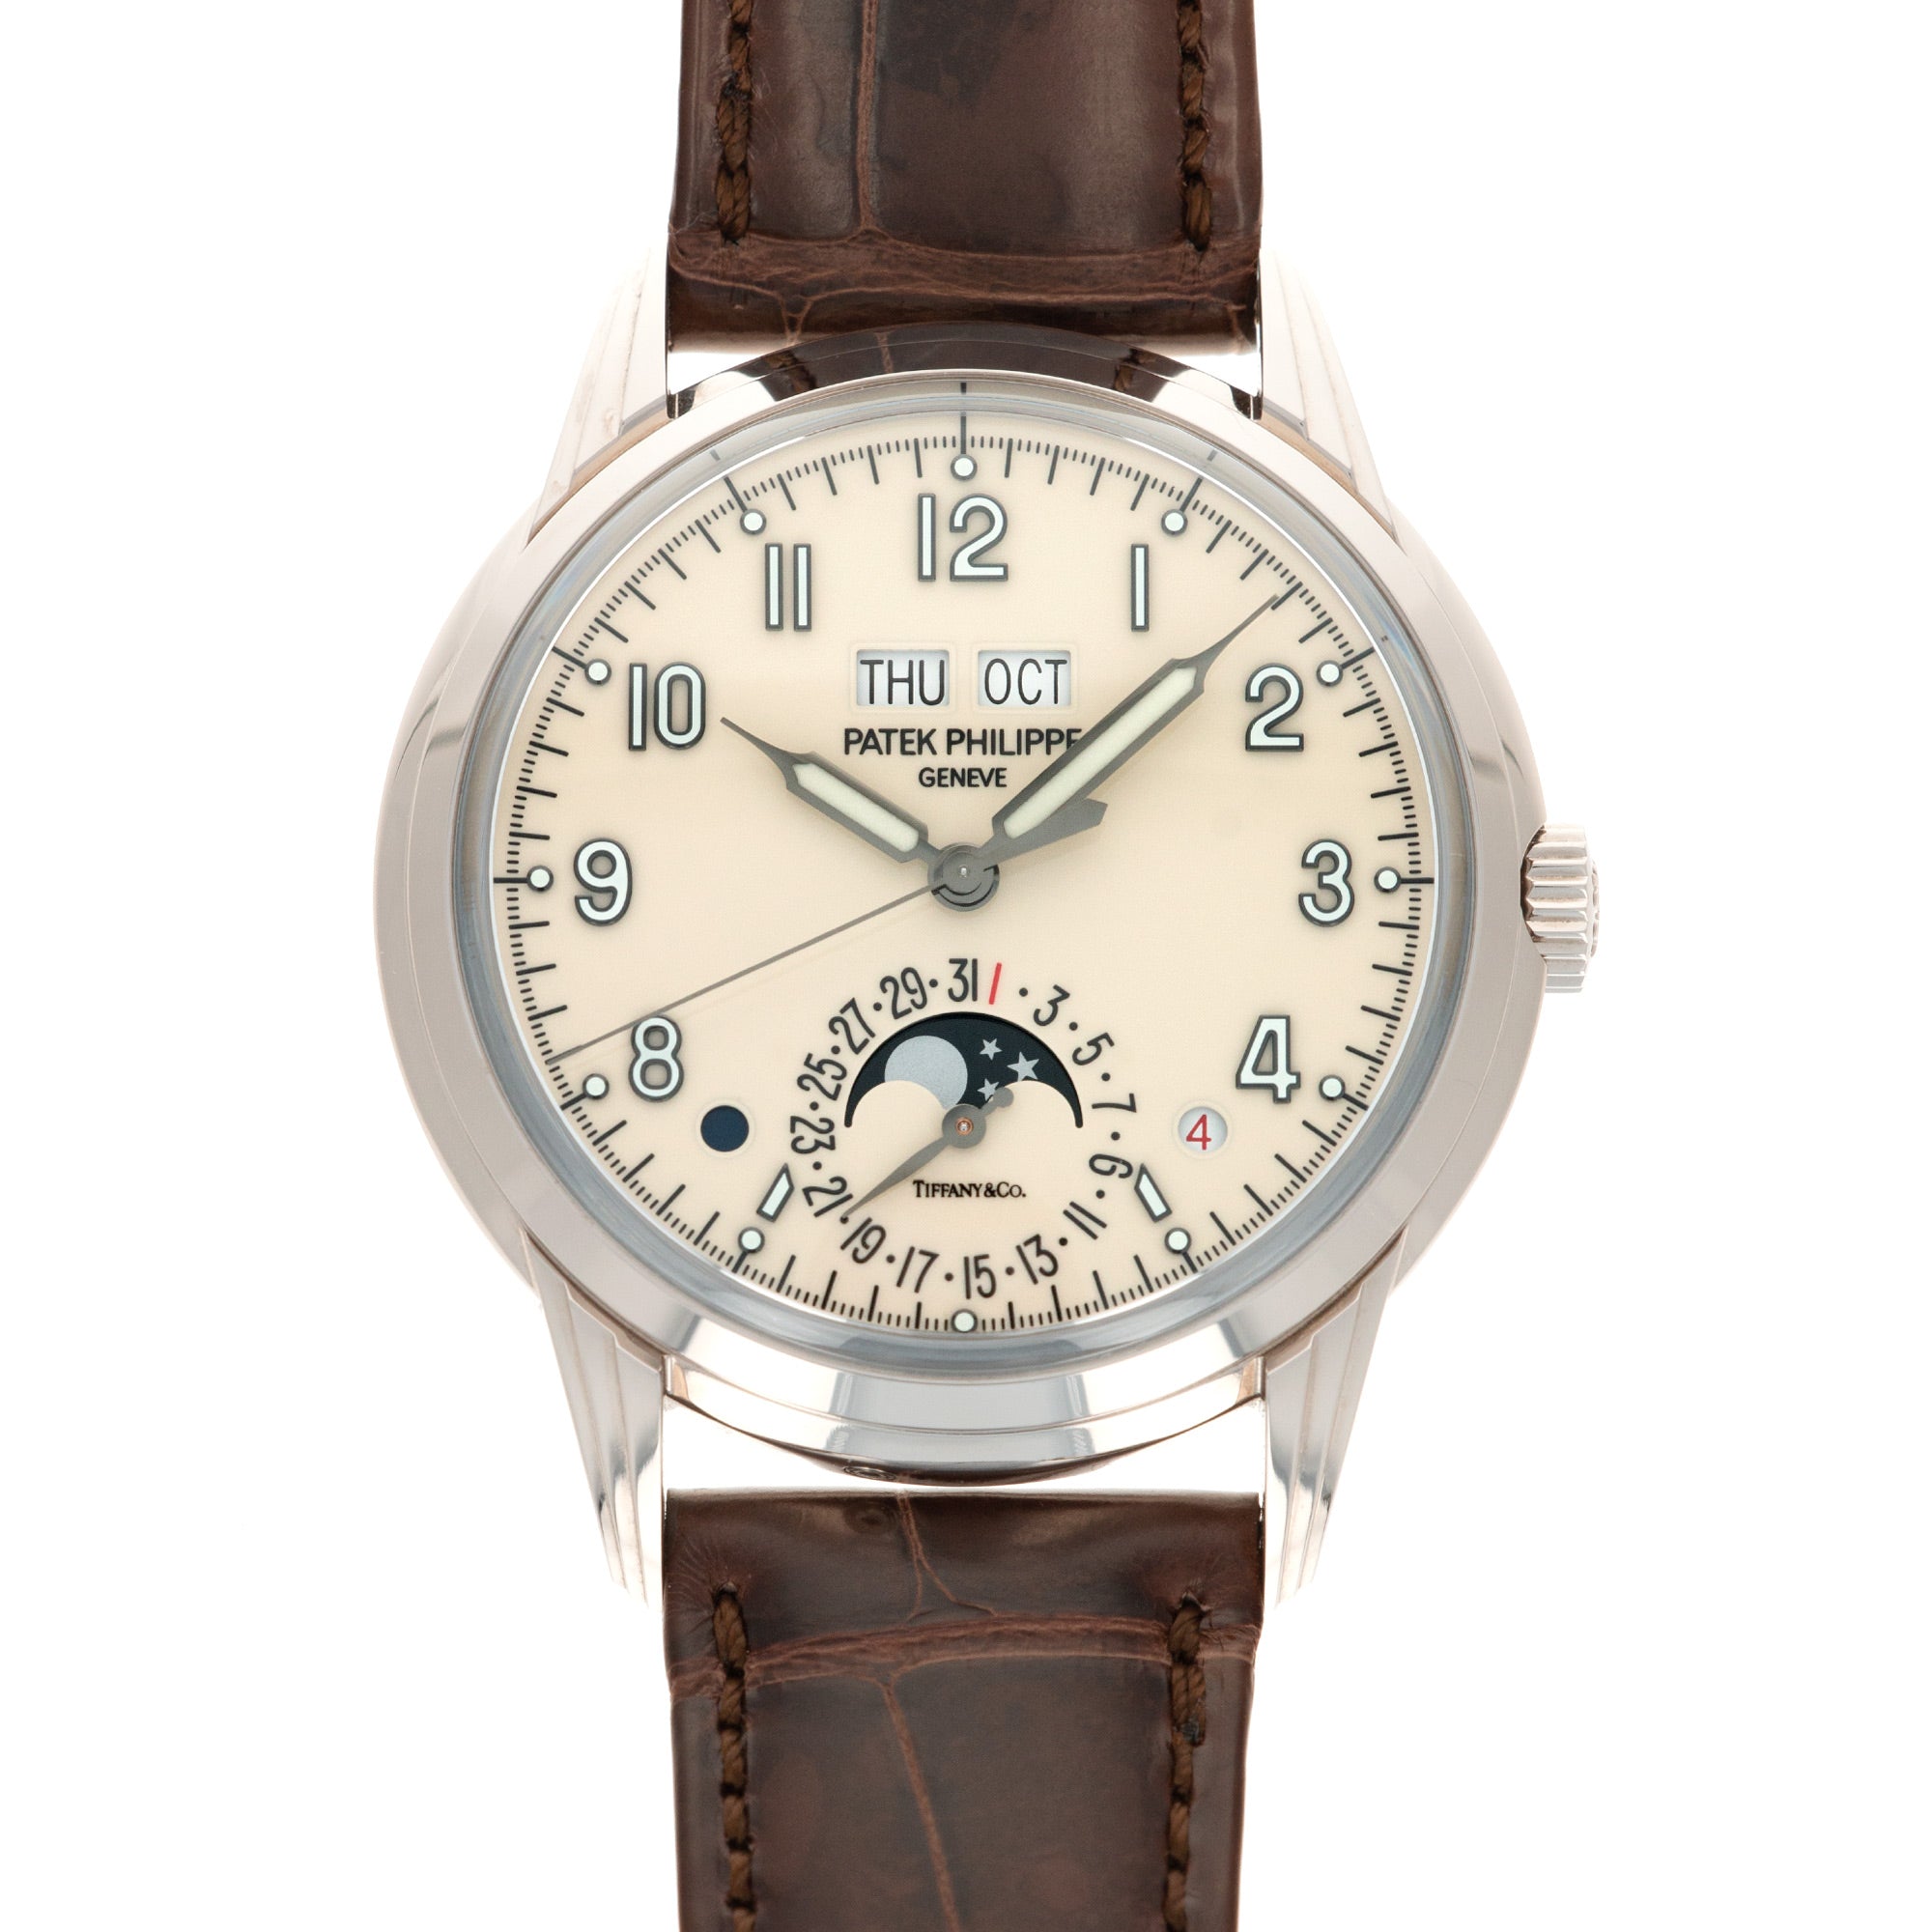 Patek Philippe - Patek Philippe White Gold Perpetual Calendar Watch Ref. 5320 retailed by Tiffany &amp; Co. - The Keystone Watches